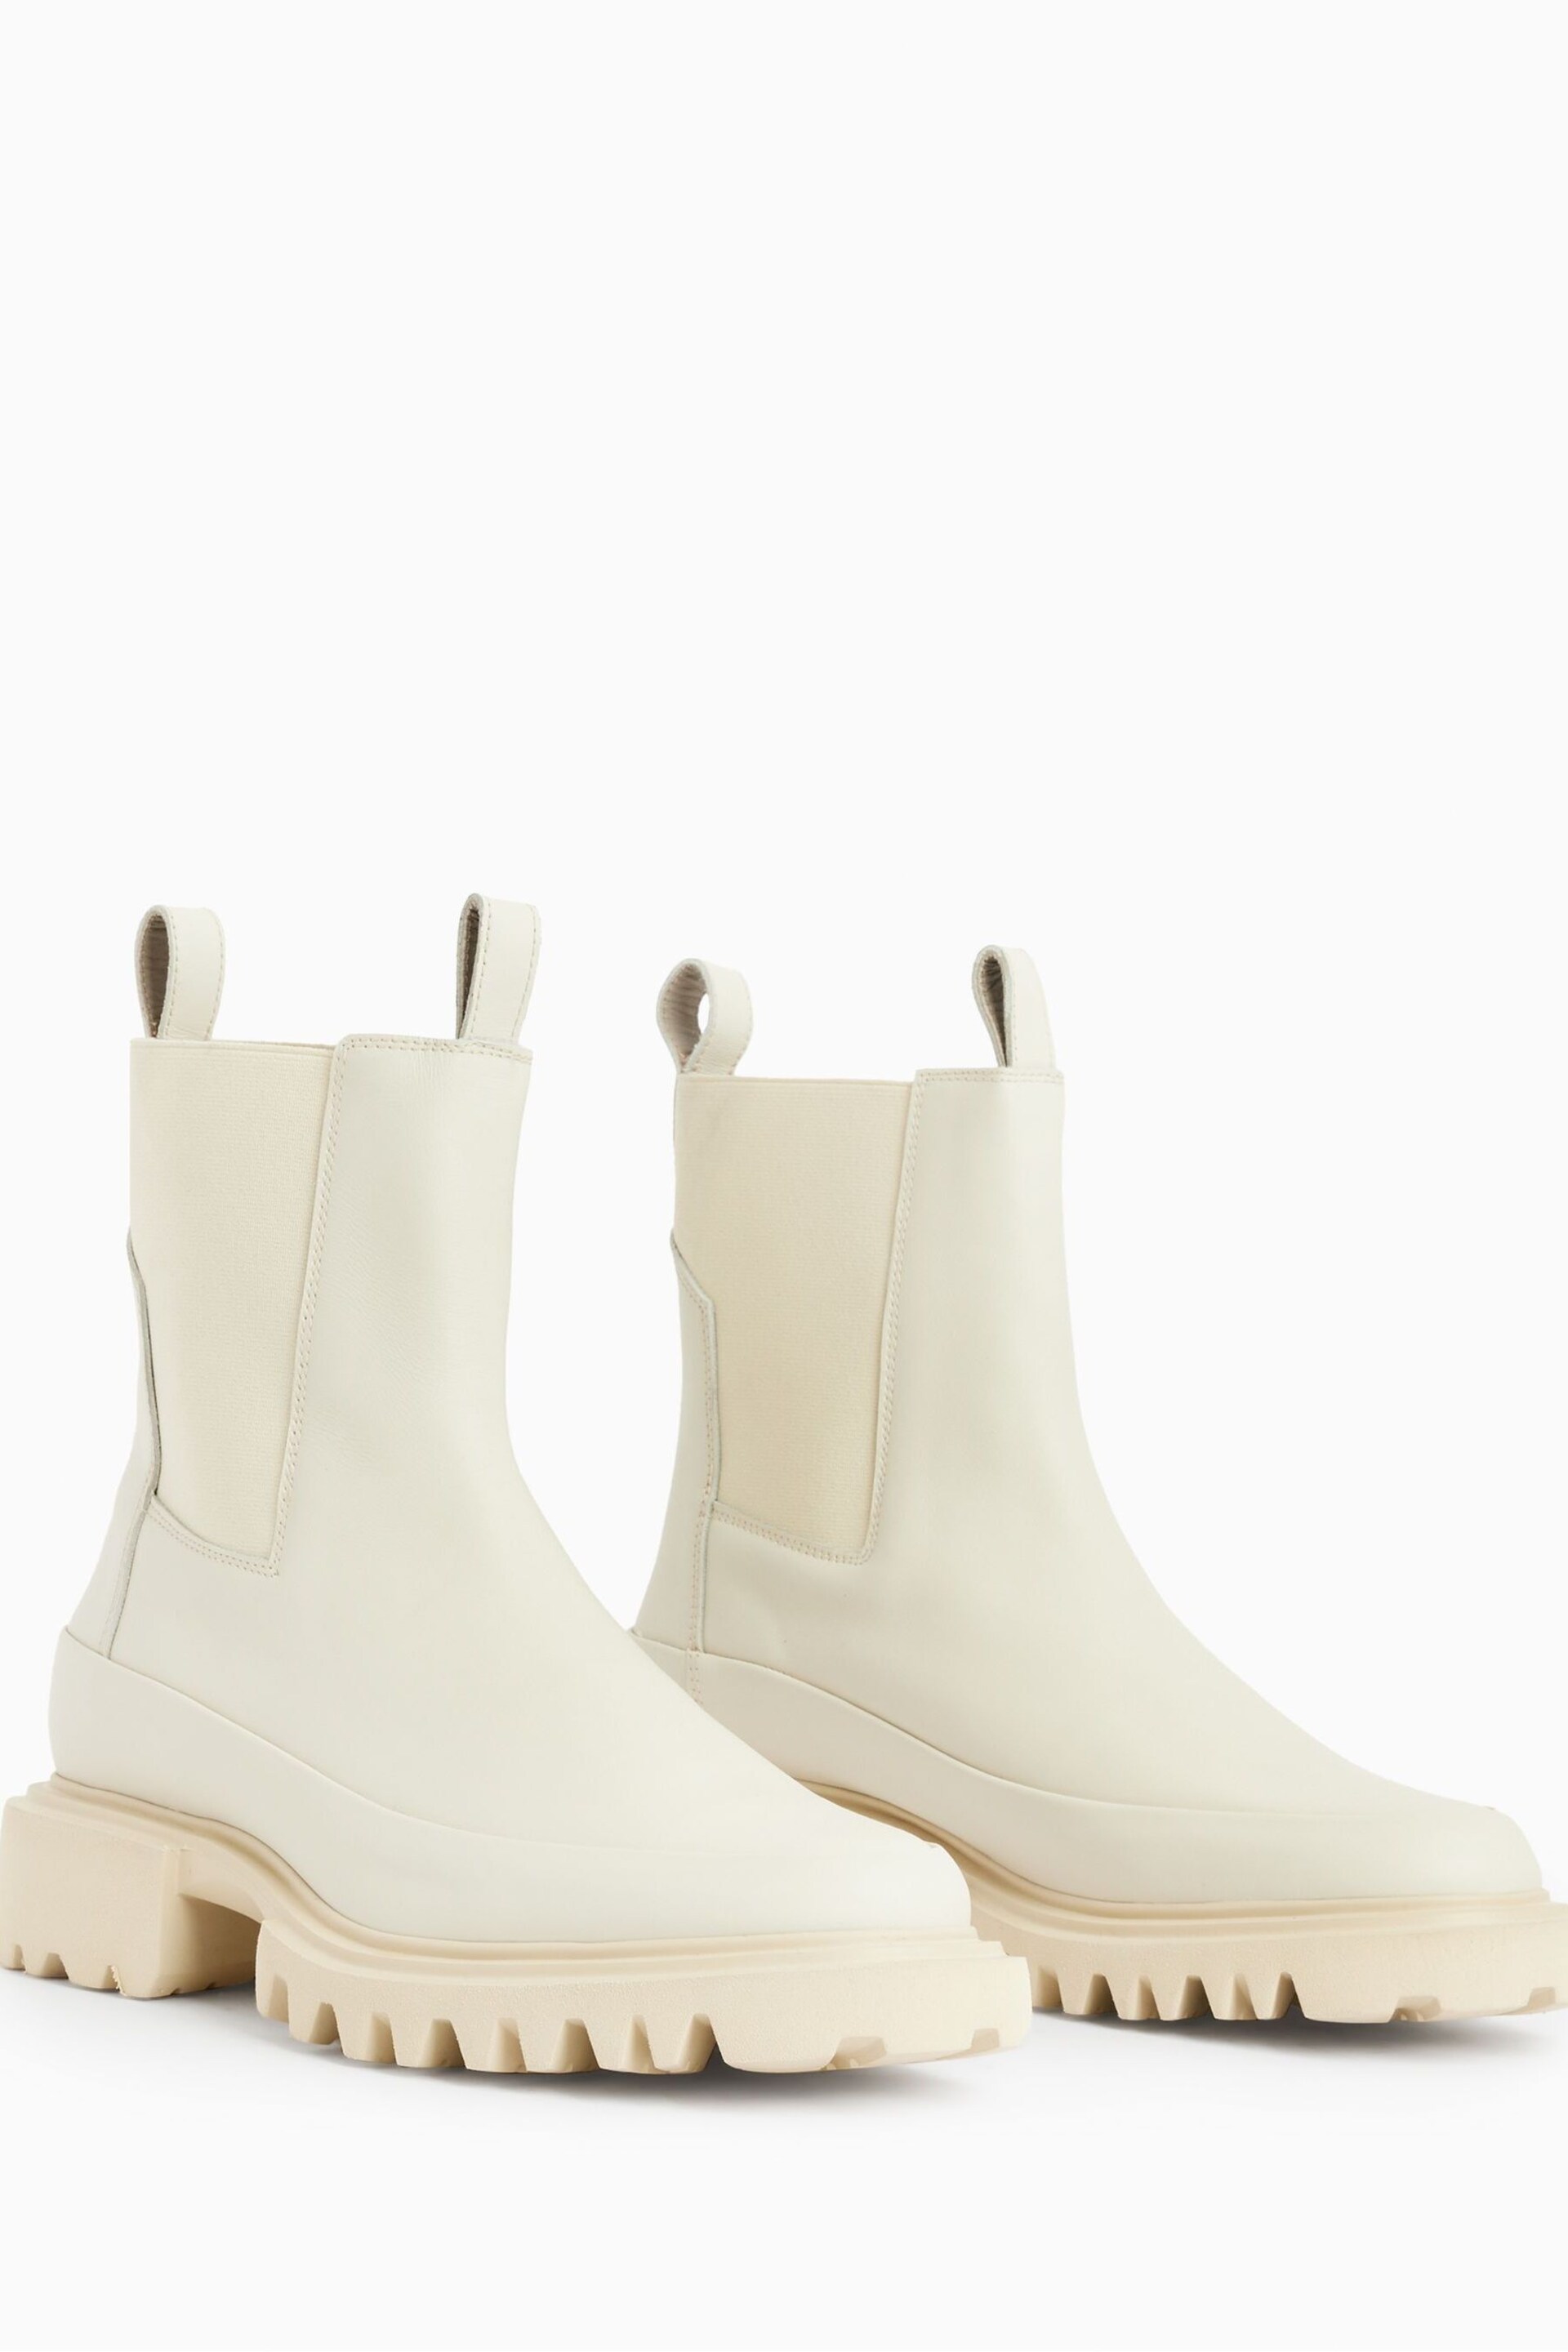 AllSaints White Harlee Boots - Image 2 of 5